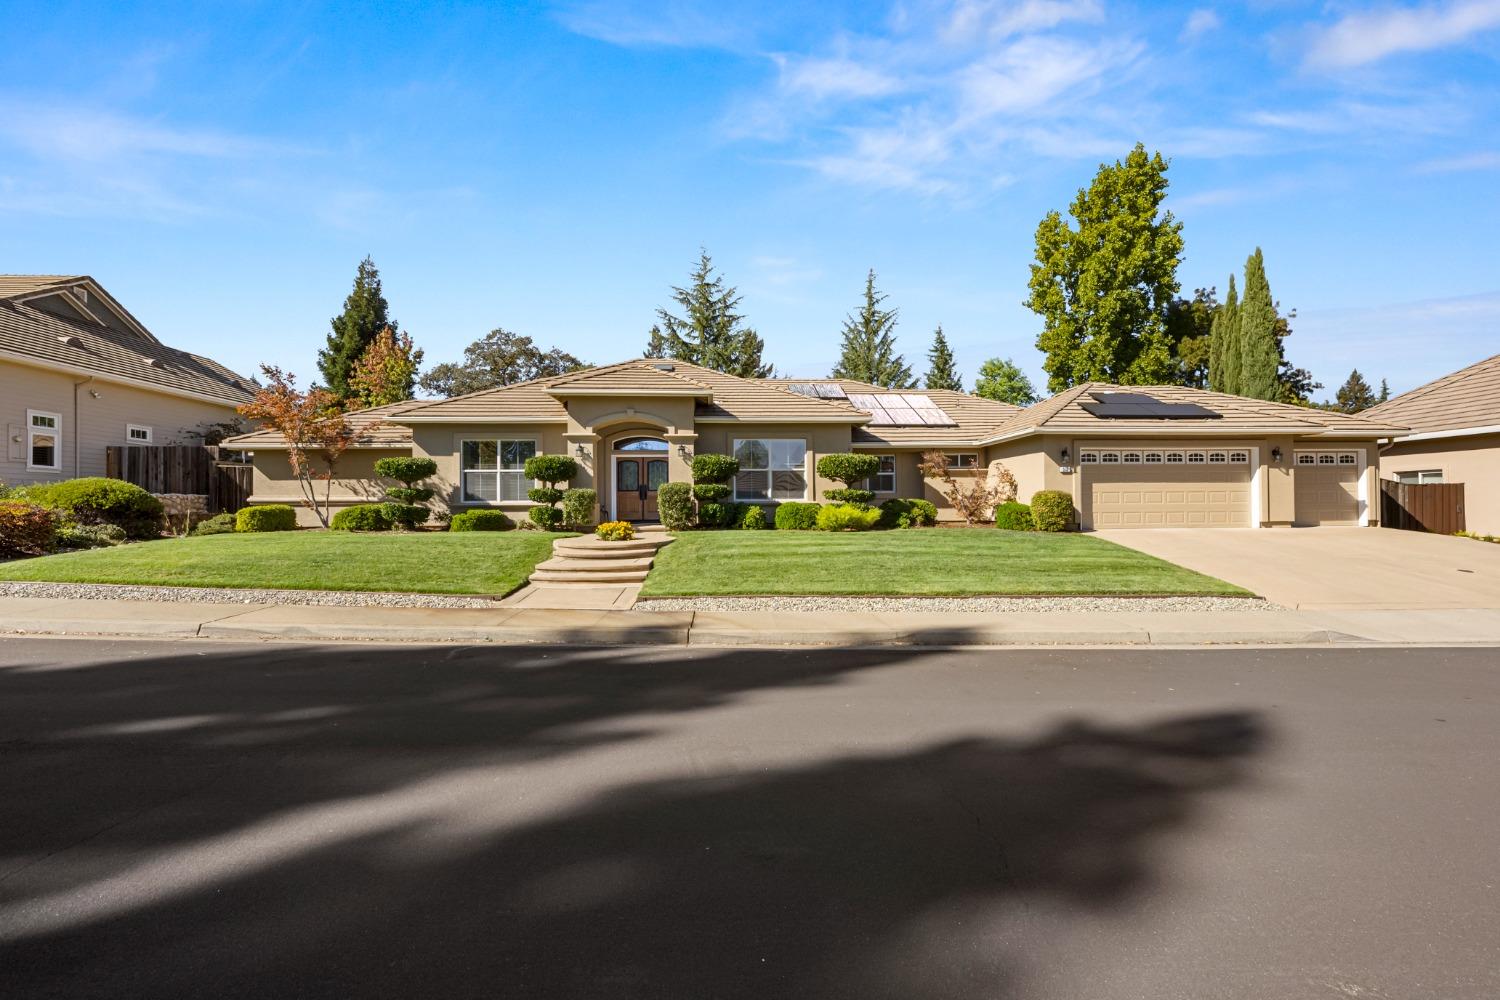 Photo of 550 Riverview Dr in Auburn, CA